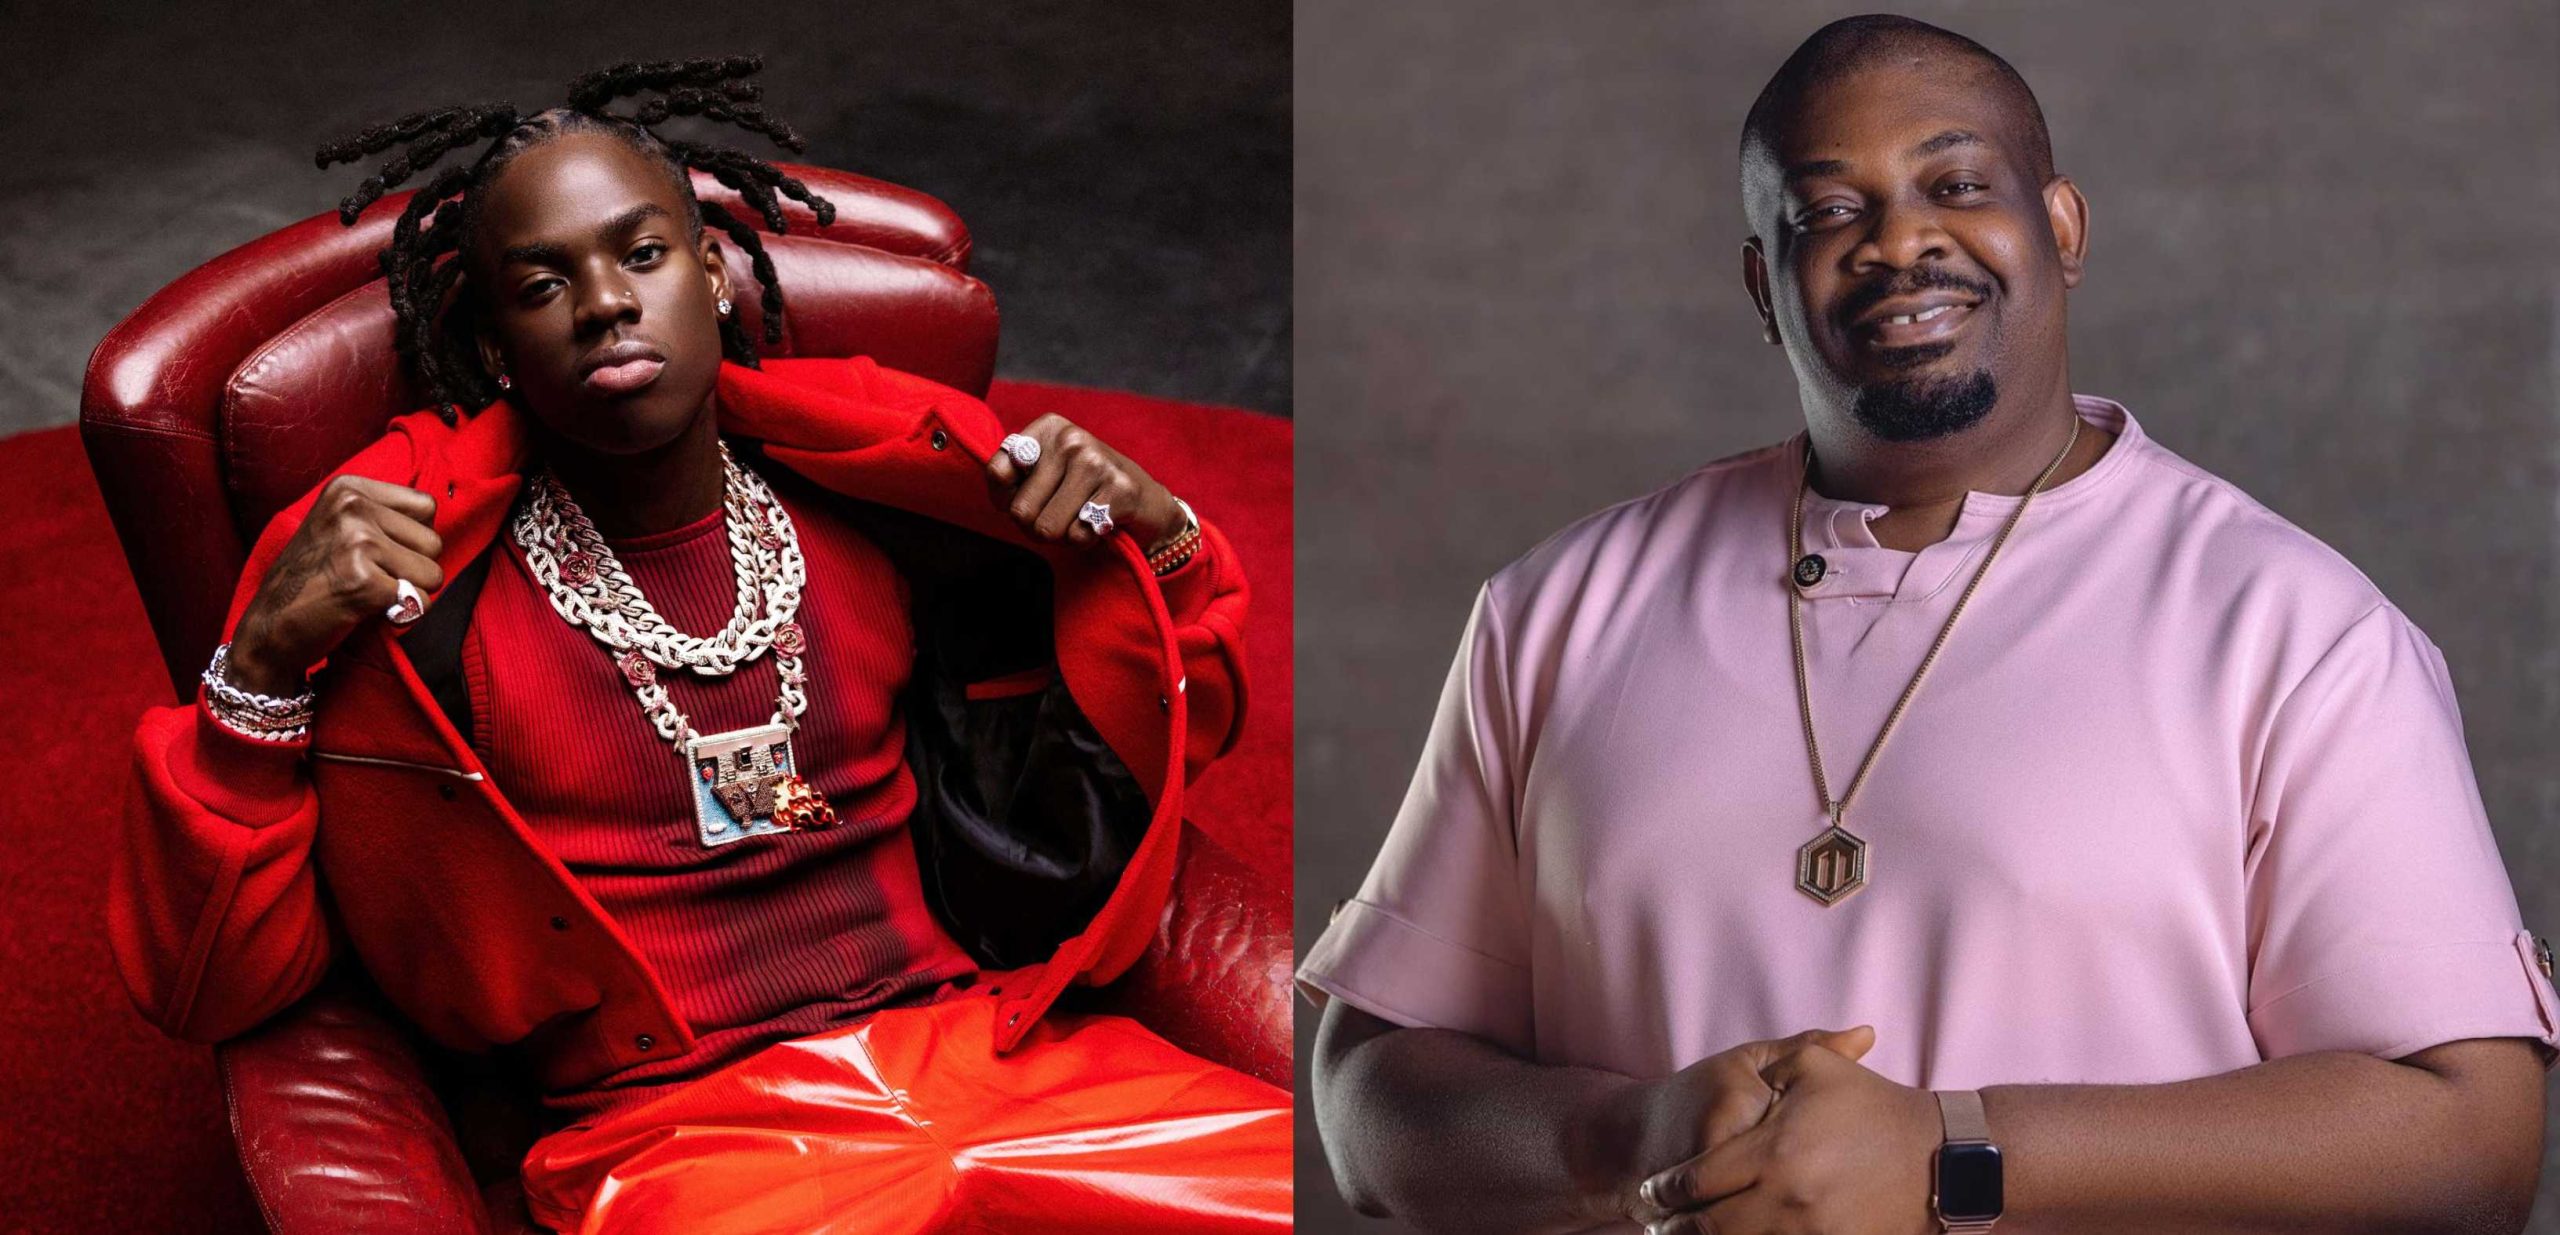 Singer Rema slams Don Jazzy’s Mavin Records for using him for fake PR after he allegedly left the label